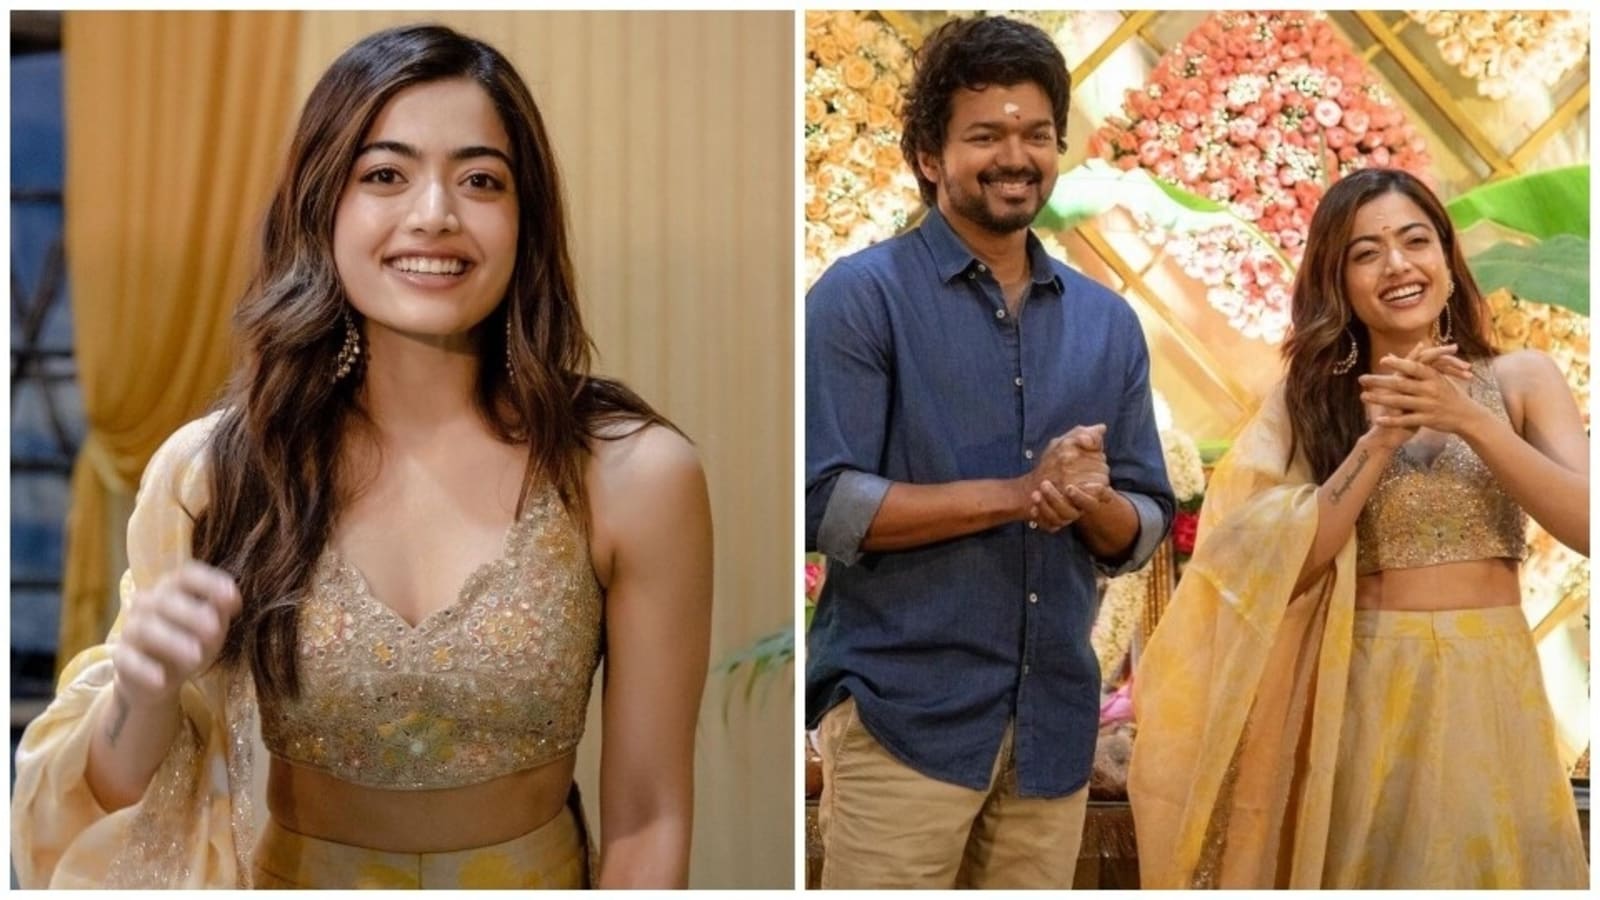 Rashmika Mandanna stuns in floral printed lehenga for new pics, fan says ‘Welcome to Thalapathy 66’: See here